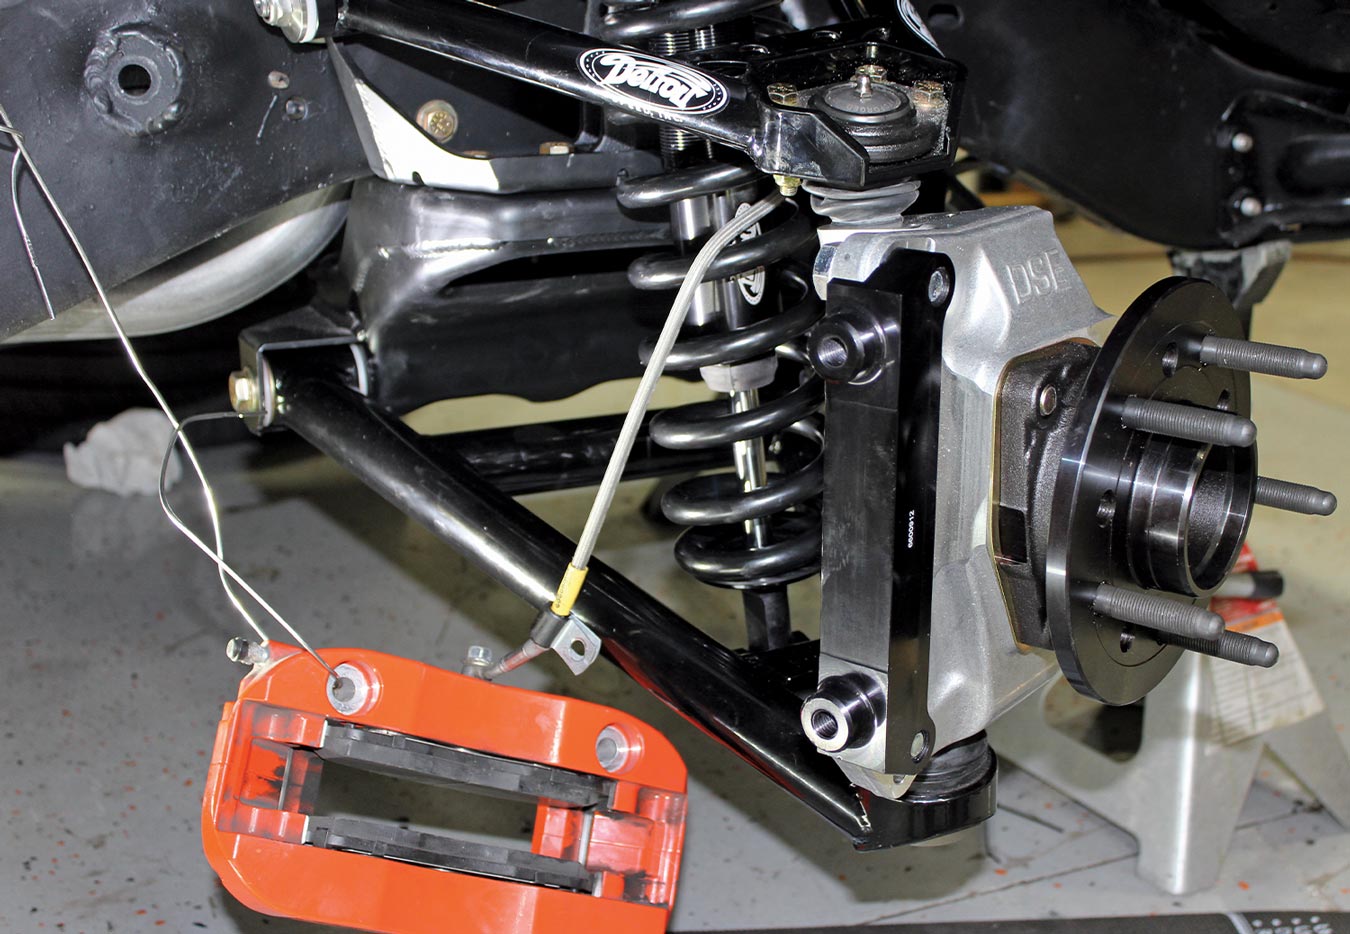 view of the caliper mounting bracket that mounts to the back of the hub